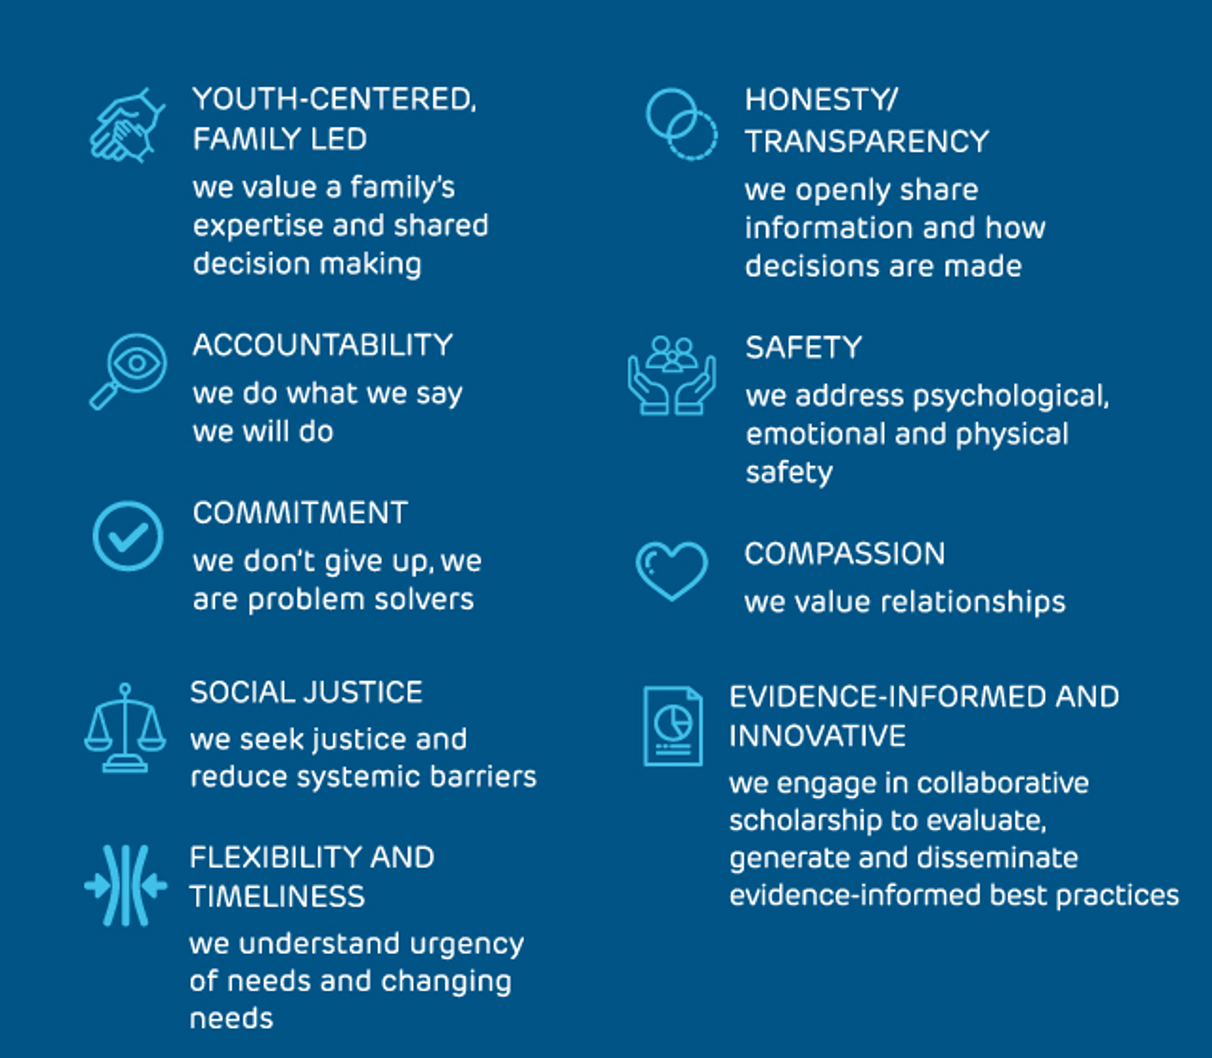 Community Violence and Trauma Support Values